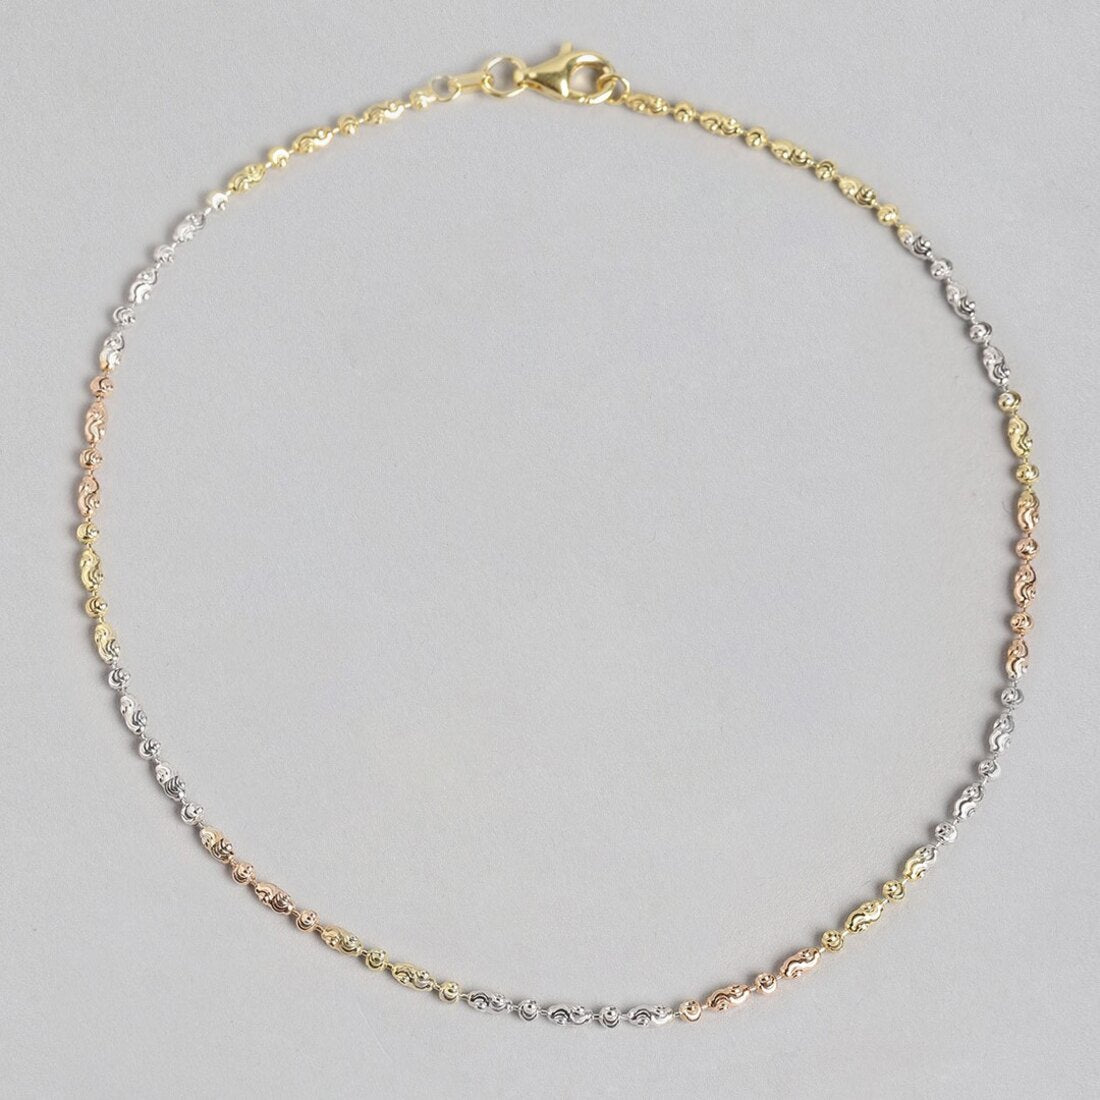 Triple Tone Weave Chain 925 Silver Anklet